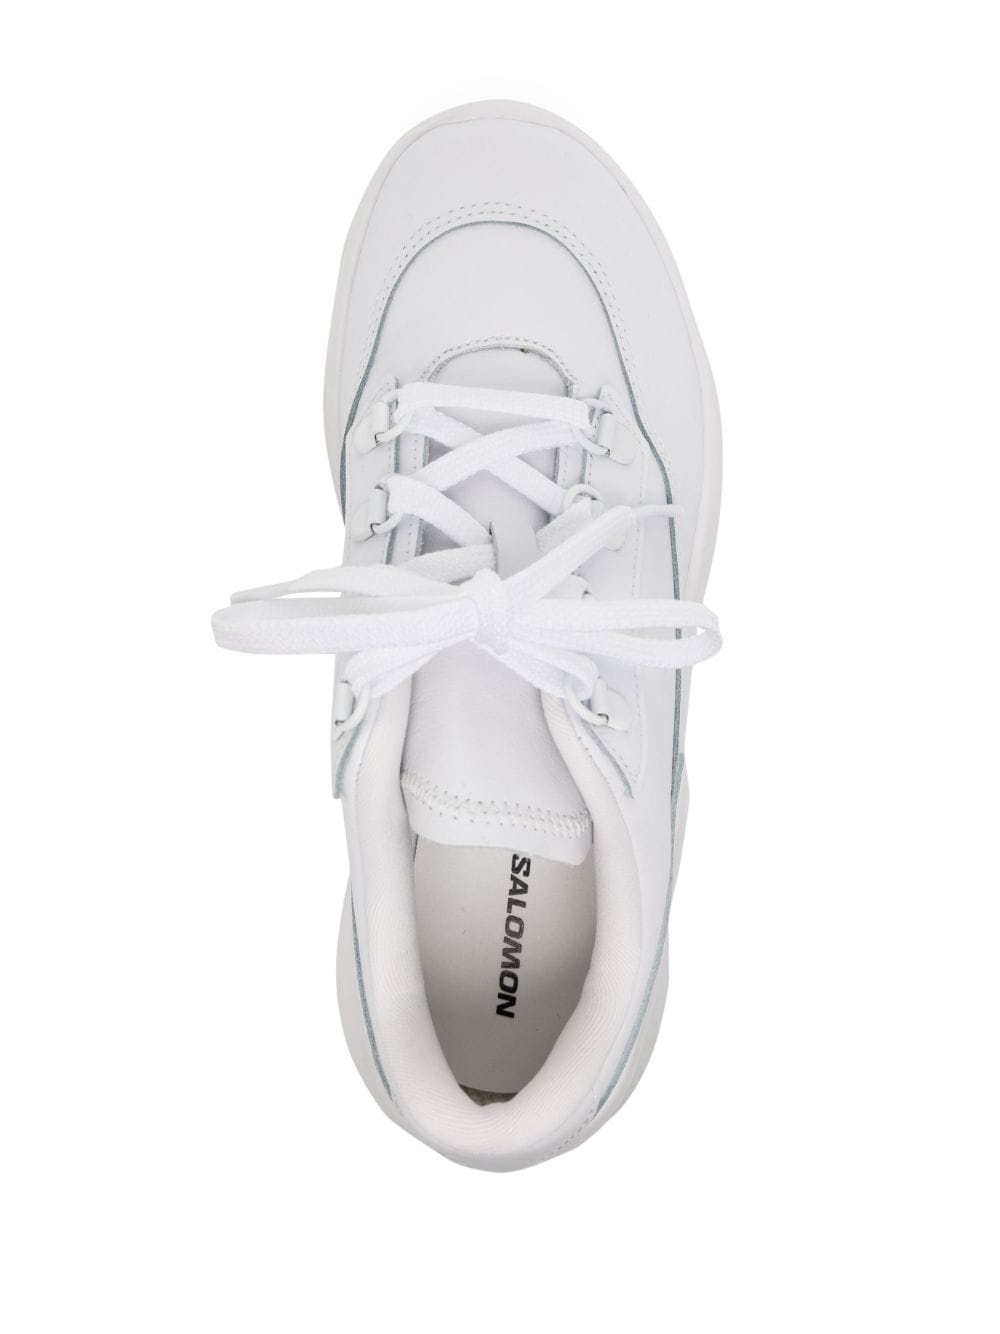 75mm leather platform sneakers - 4